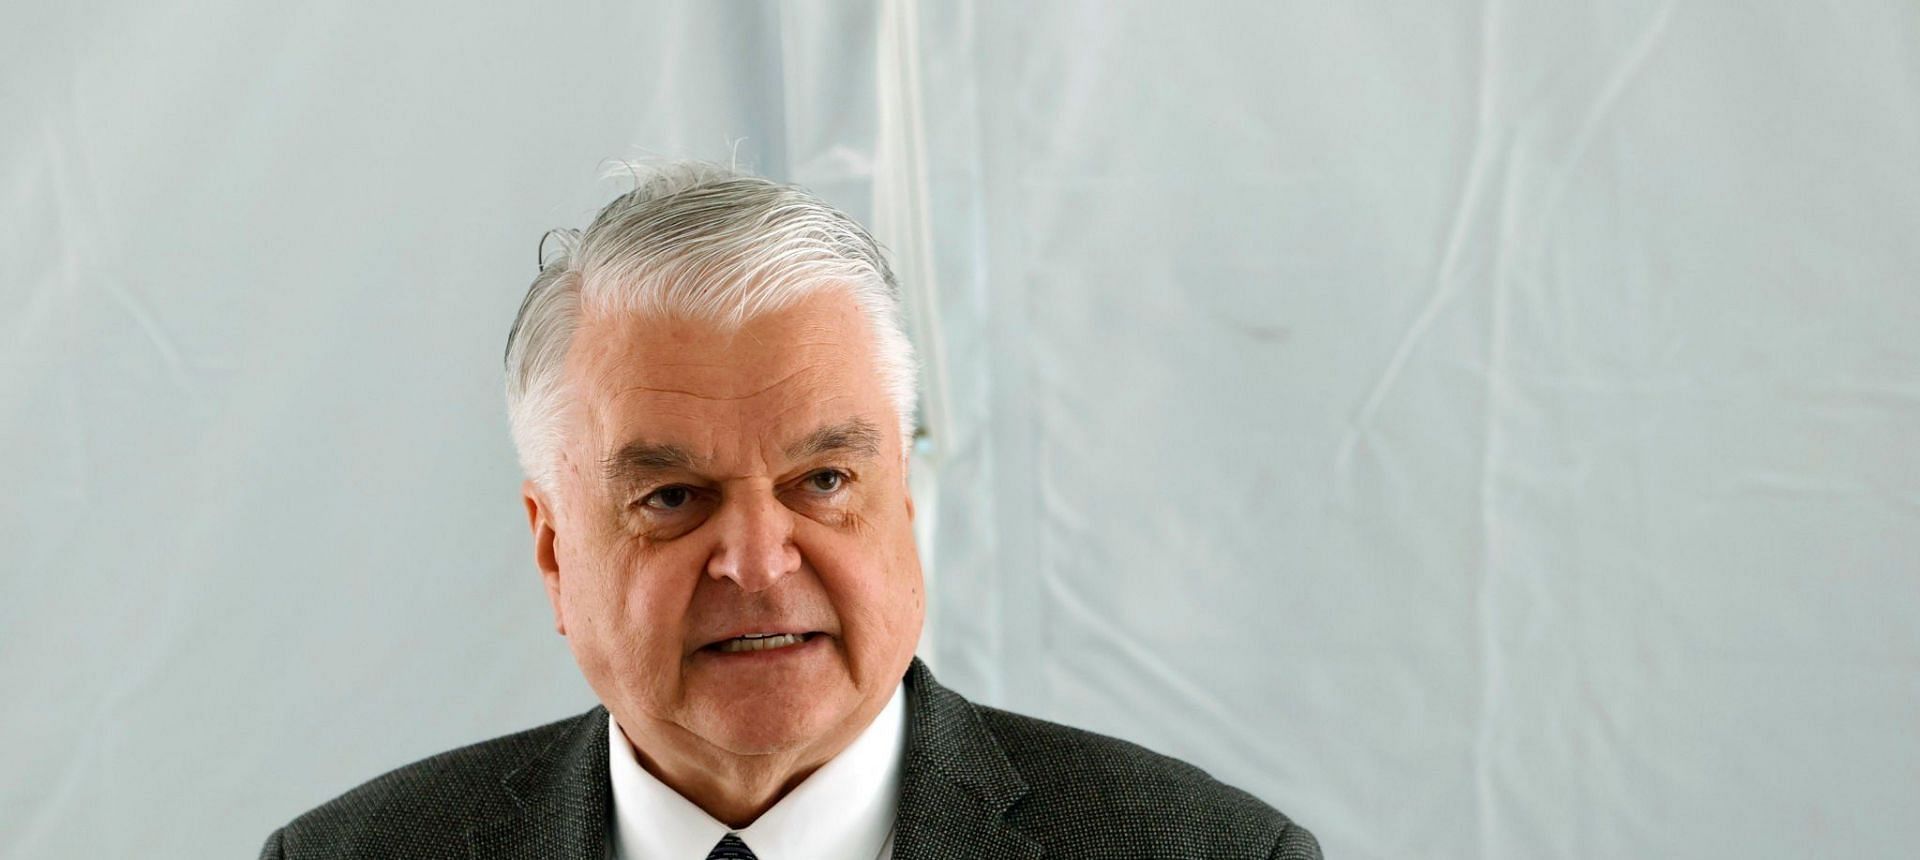 Steve Sisolak serves as the 30th governor of Nevada (Image via Ethan Miller/Getty Images)